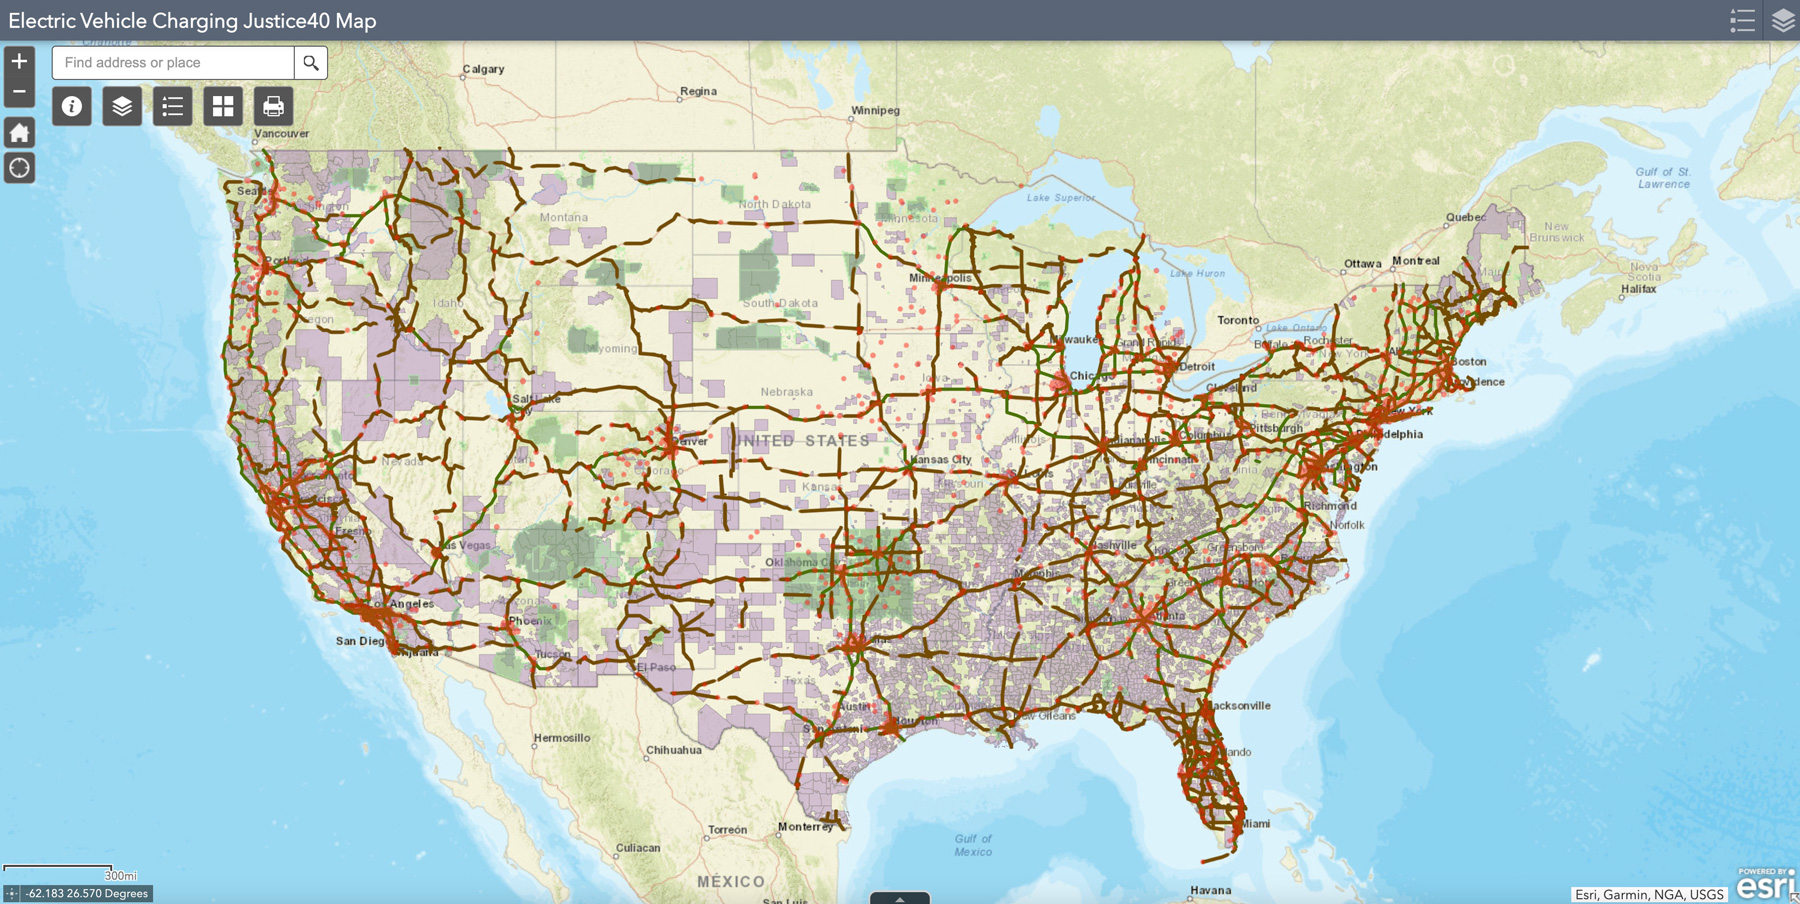 Electric Vehicle Charging Justice40 Map screenshot